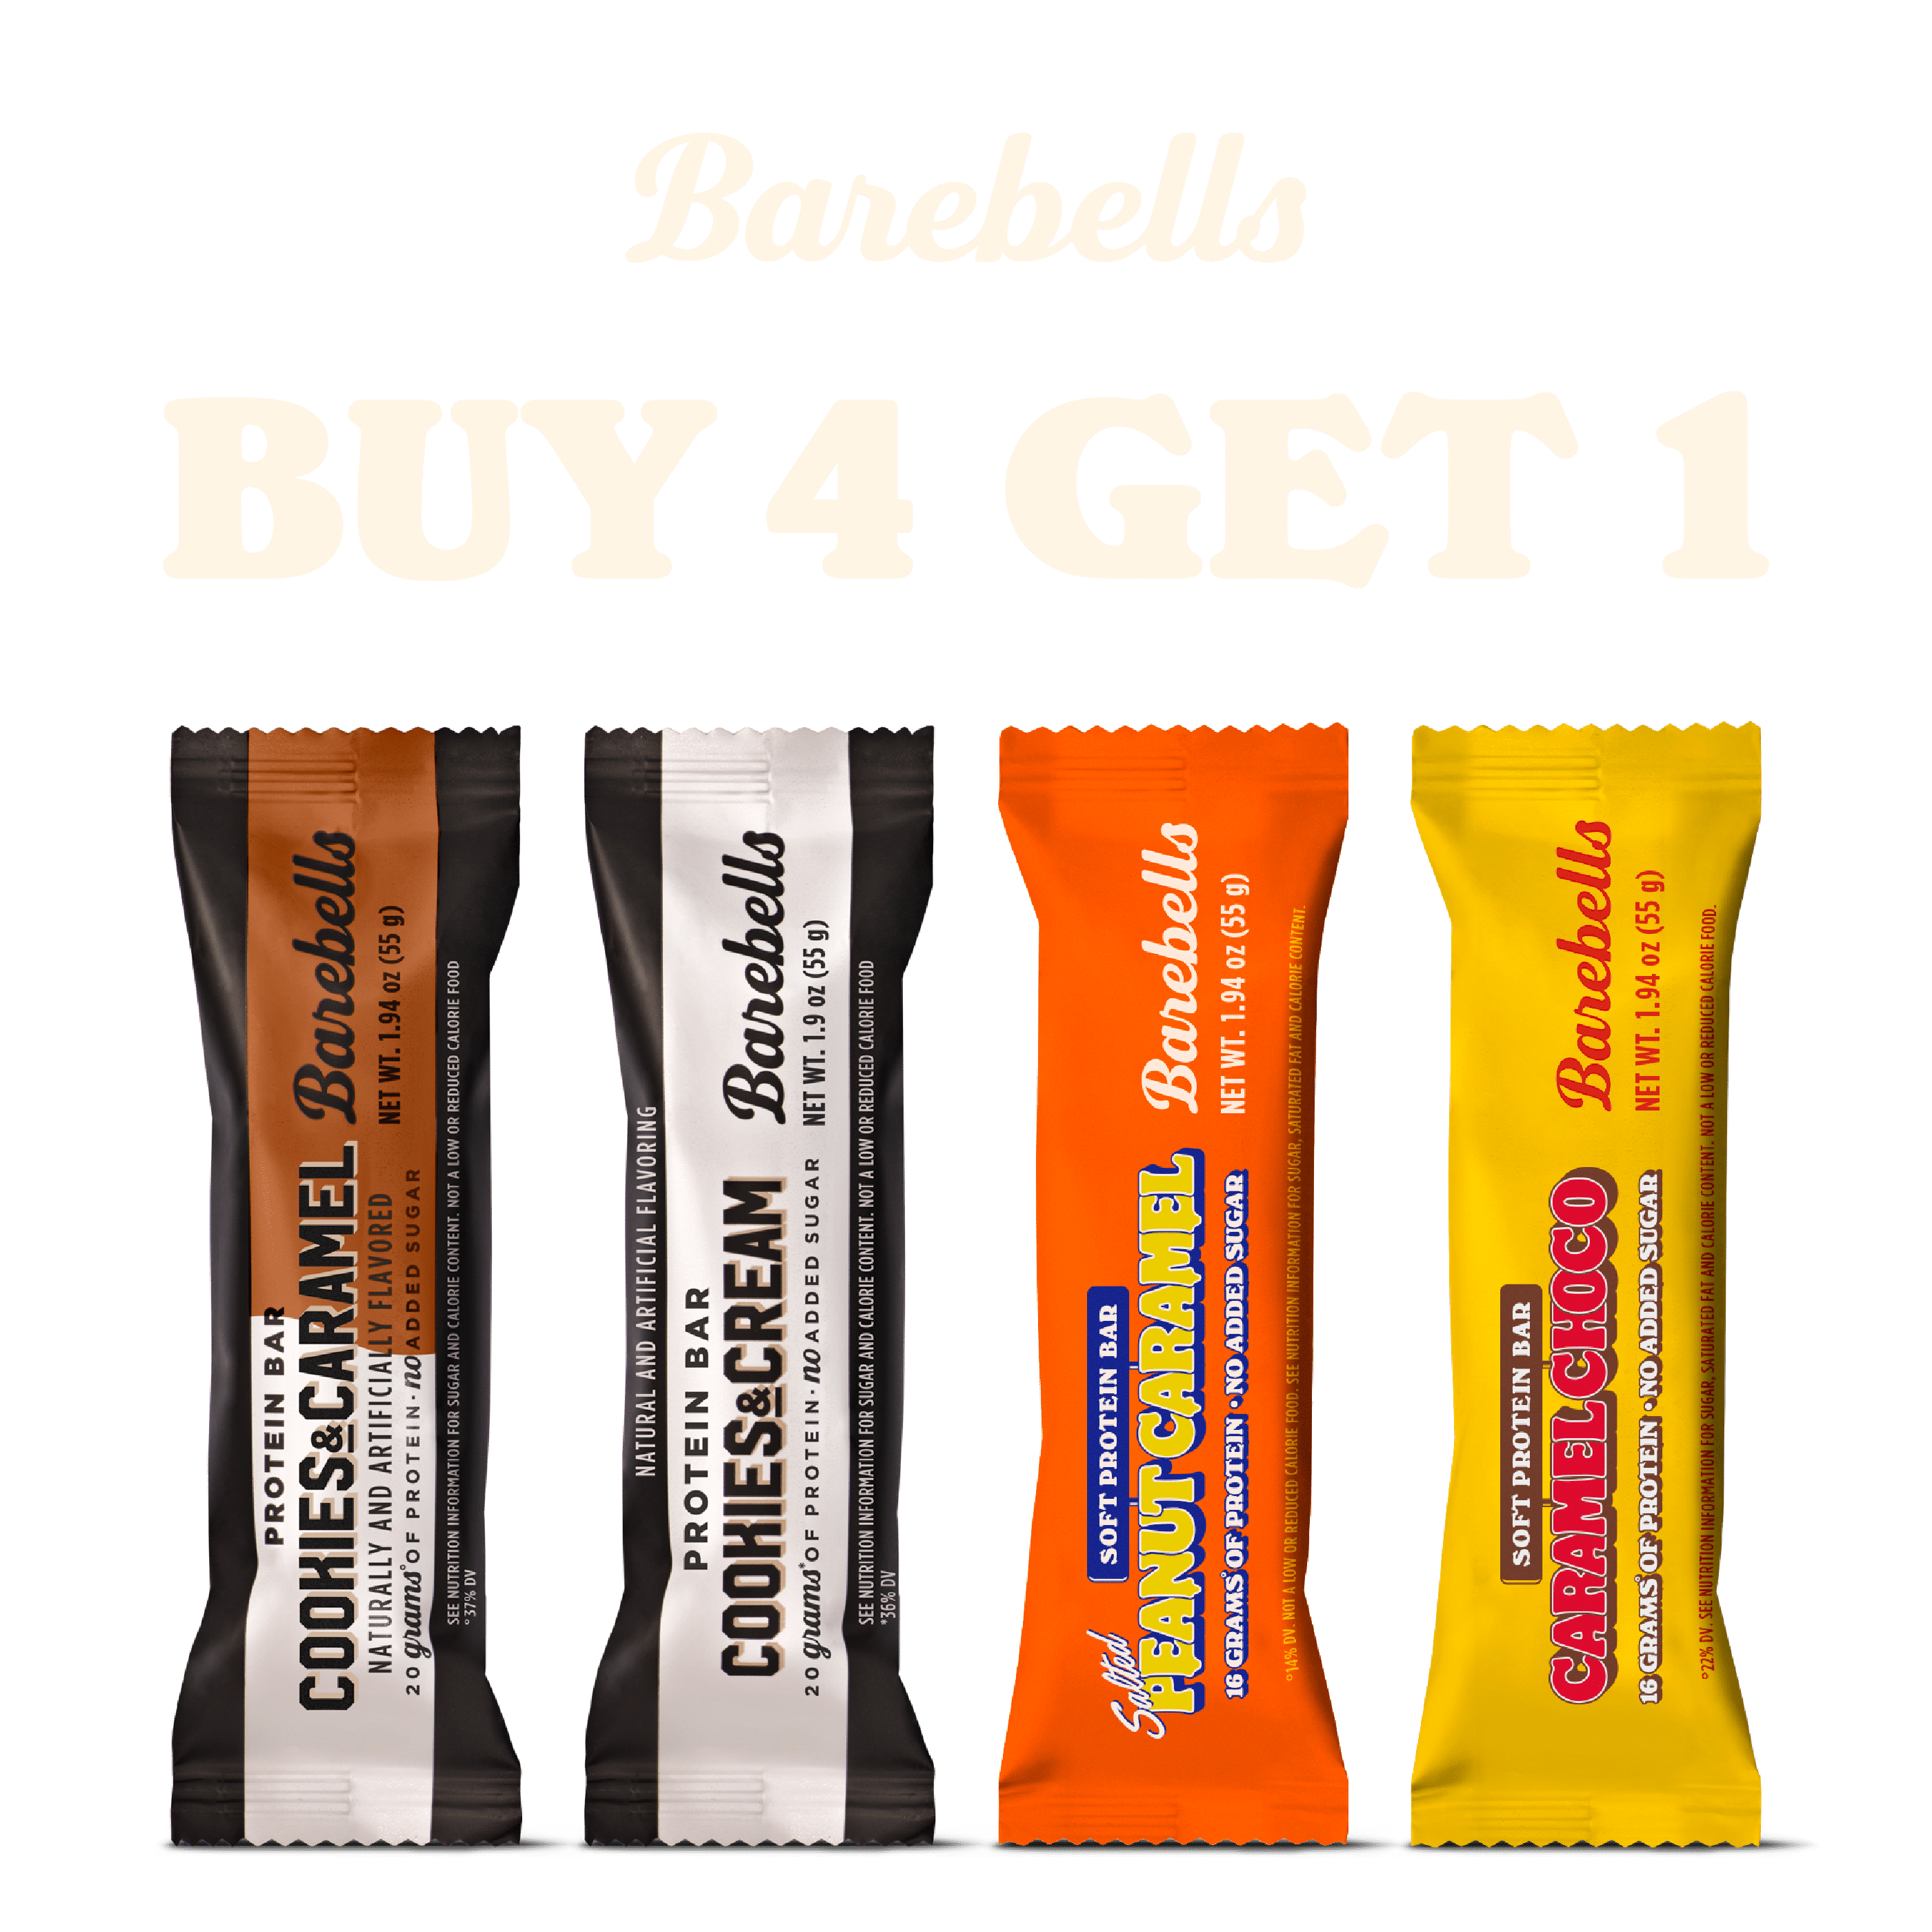 BUY 4, GET 1 FOR FREE!